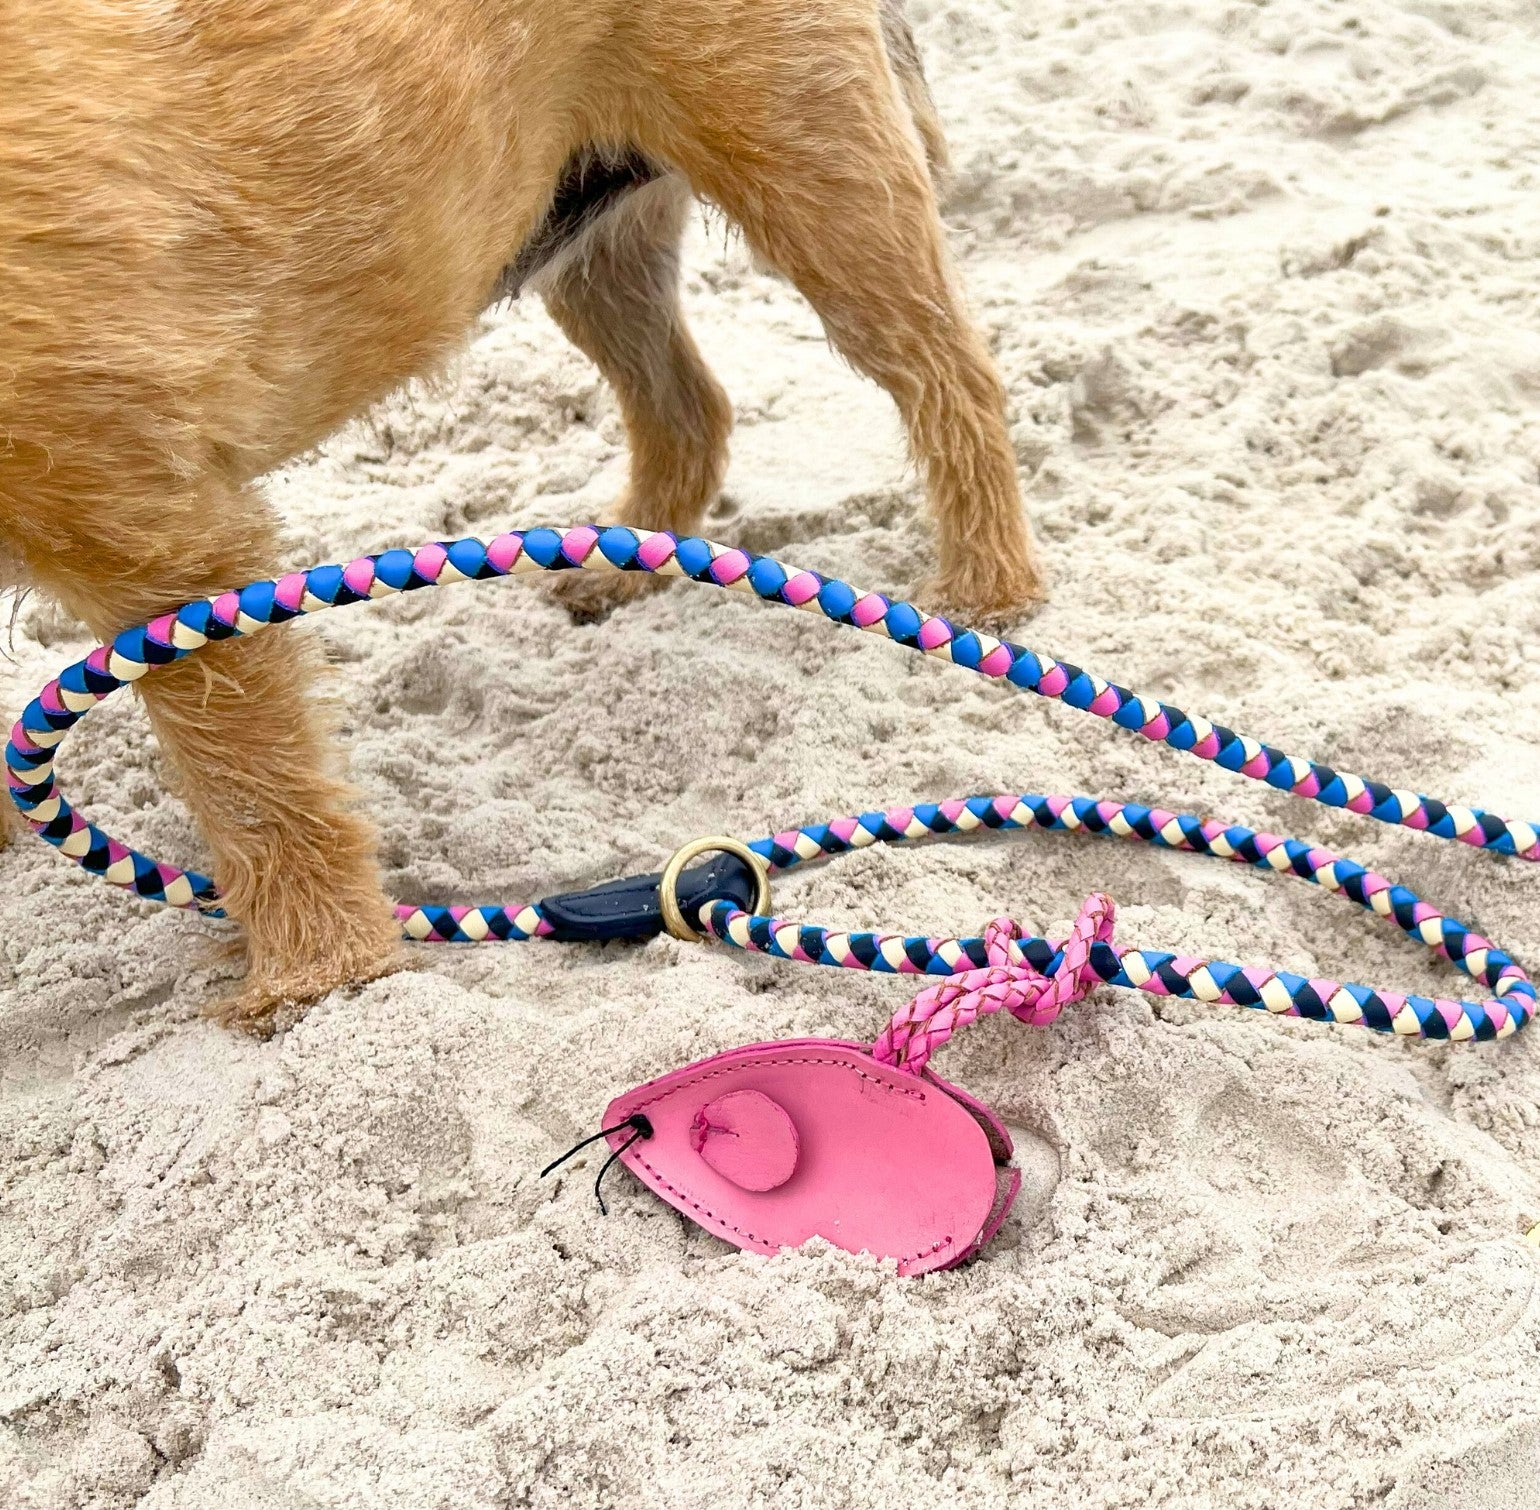 A dog's Georgie Paws pink Mouse Poobag Dispenser partially buried in the sand, with a buffalo leather collar attached and the animal partly visible, suggesting a playful beach day with a pet enjoying some off-leash freedom.